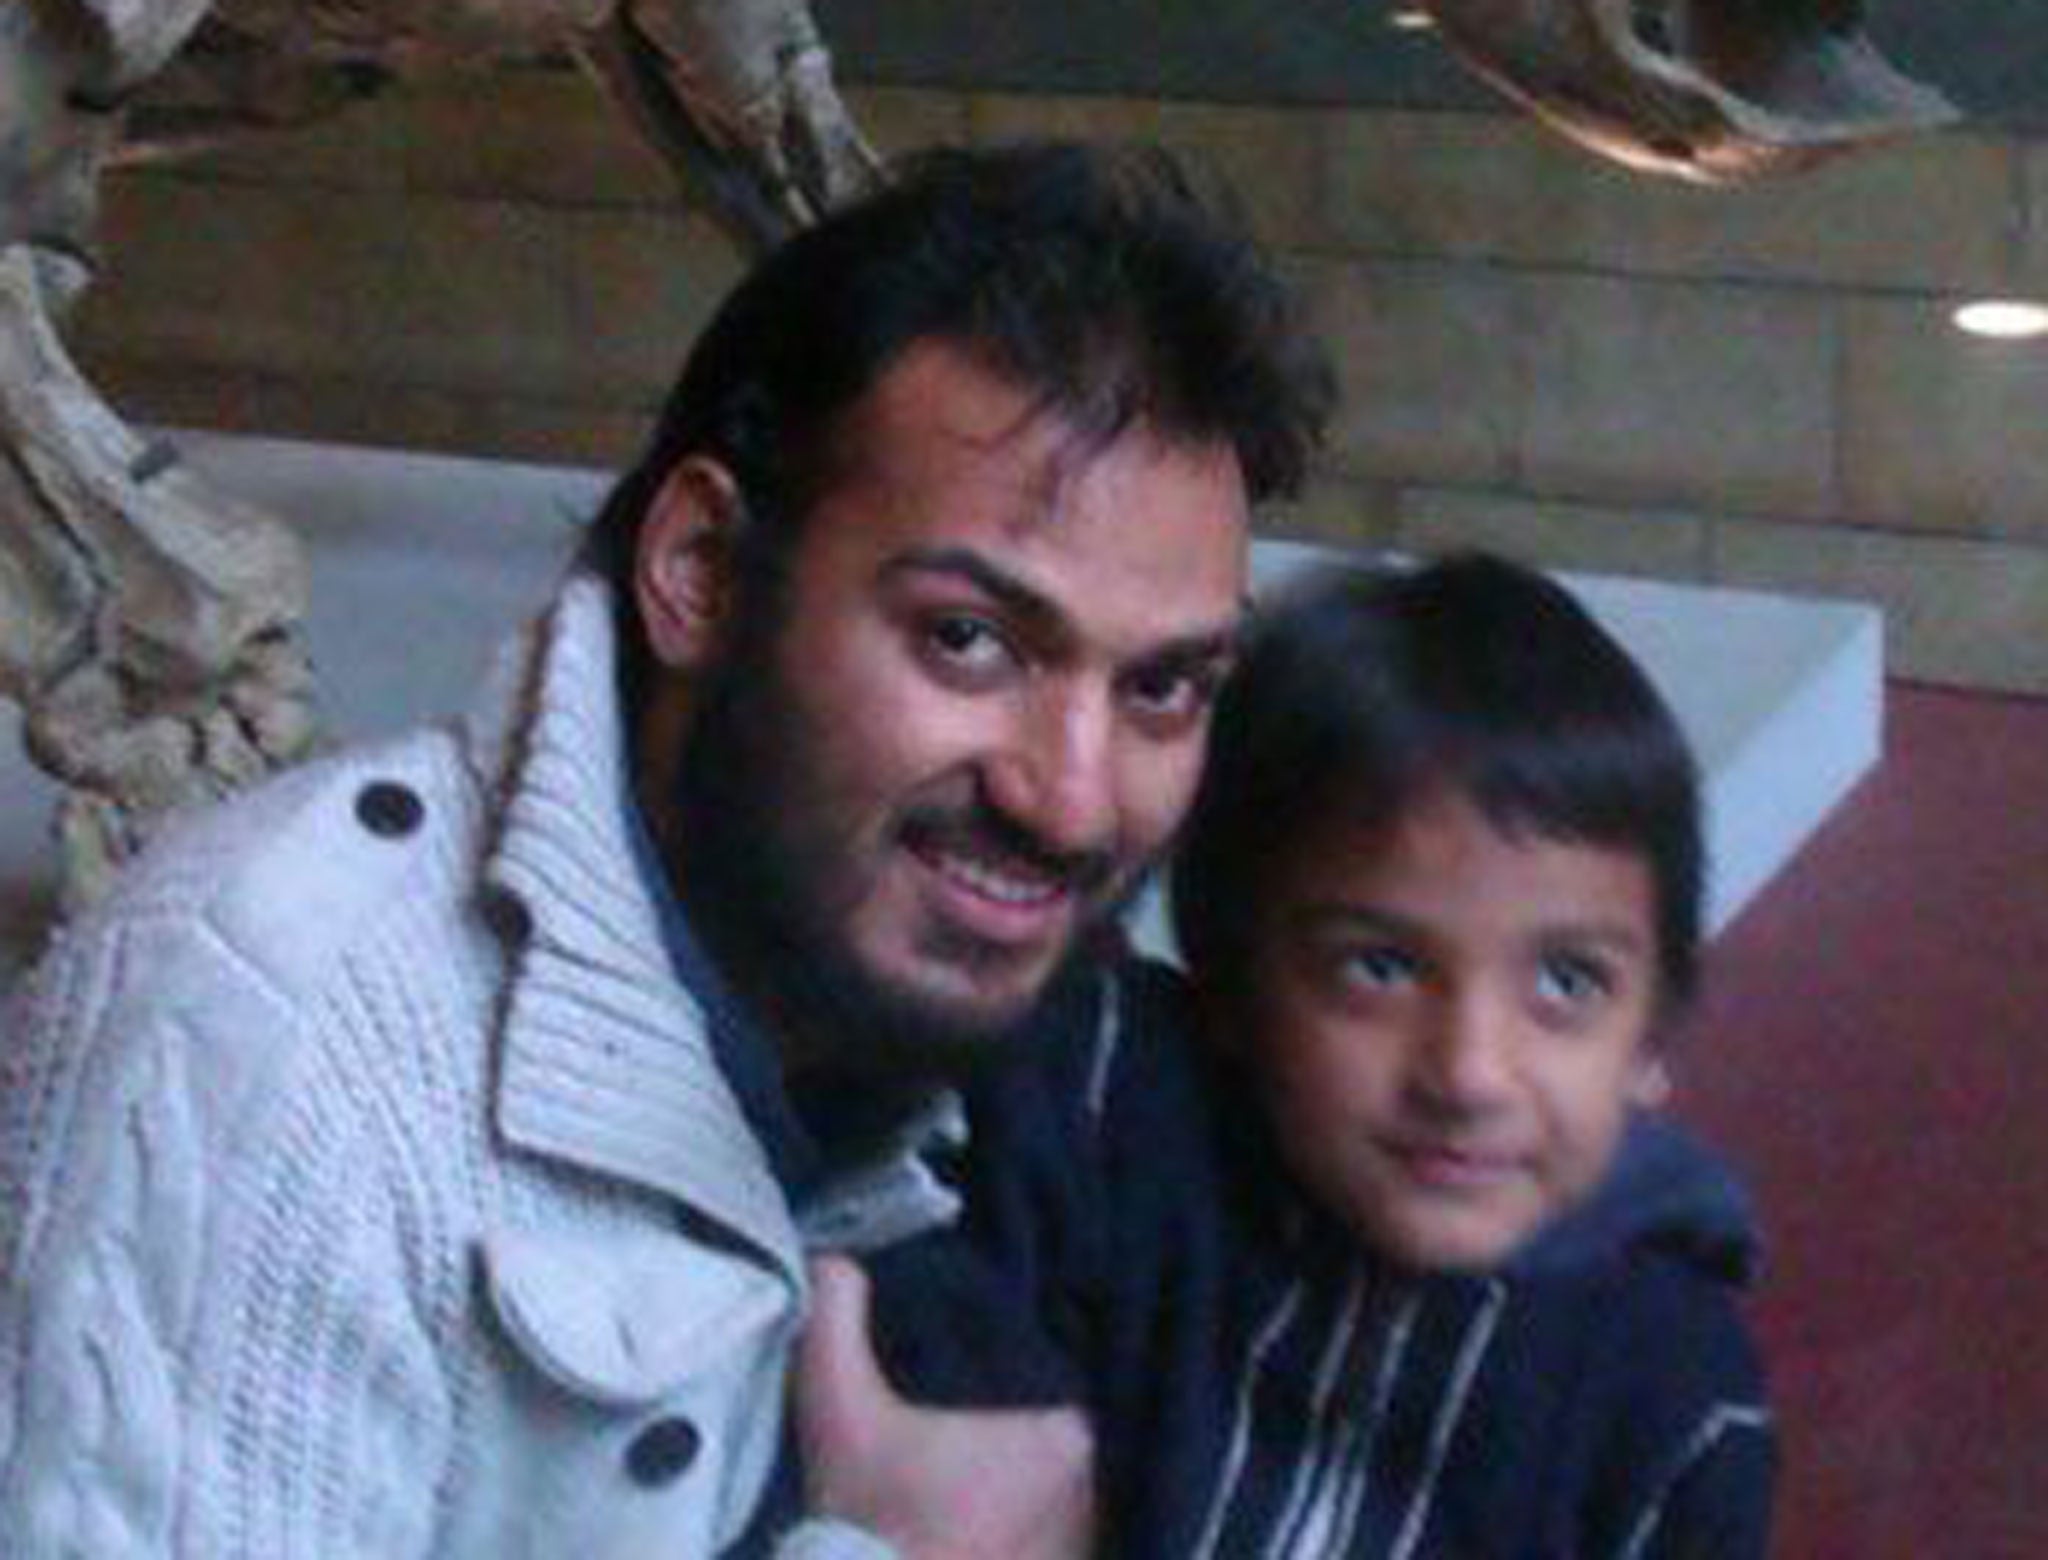 British surgeon Dr Abbas Khan, pictured here with his son, died in detention.